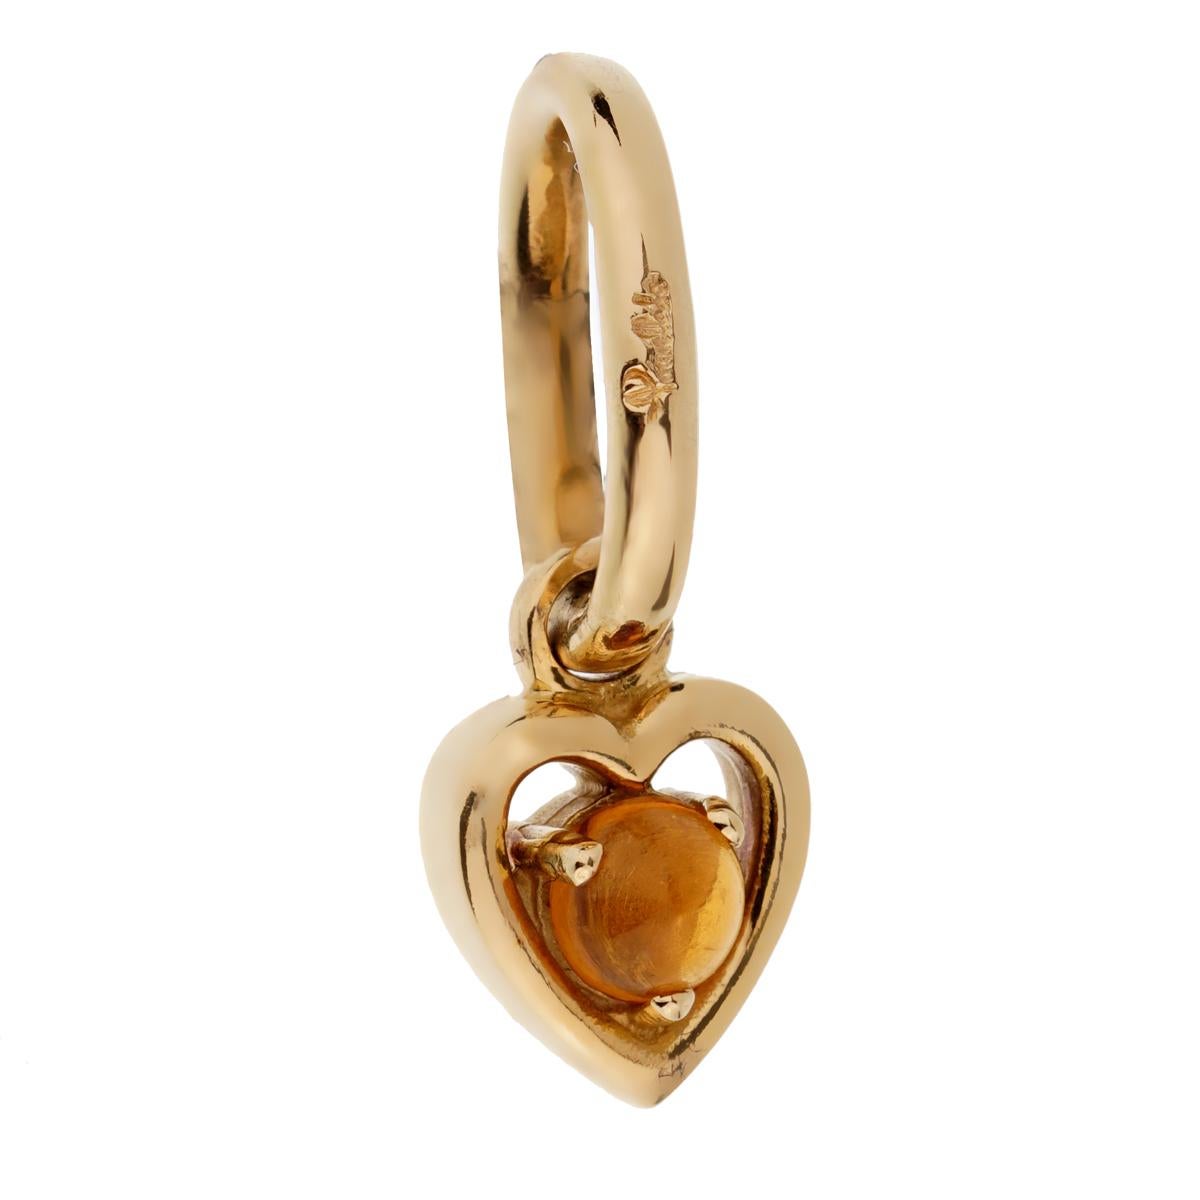 A chic brand new Pomellato charm pendant featuring a .30ct citrine set in 18k yellow gold. 

Sku: 2219